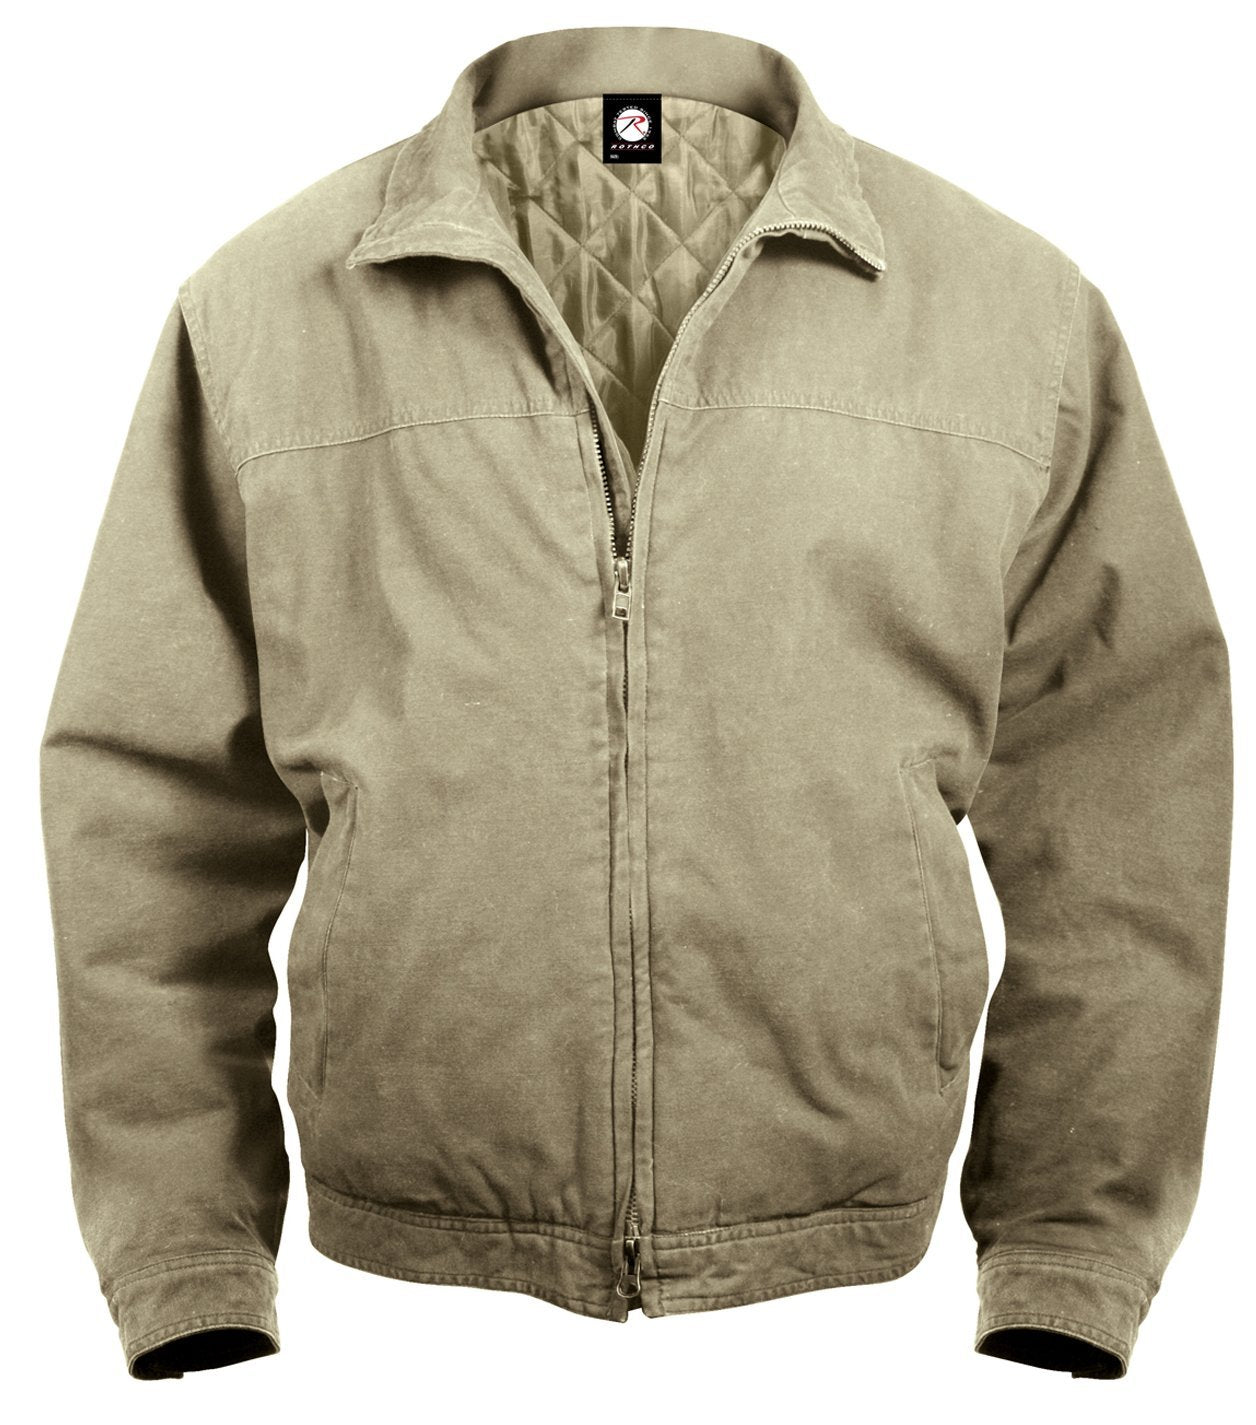 Concealed Carry Jacket – Outdoor King